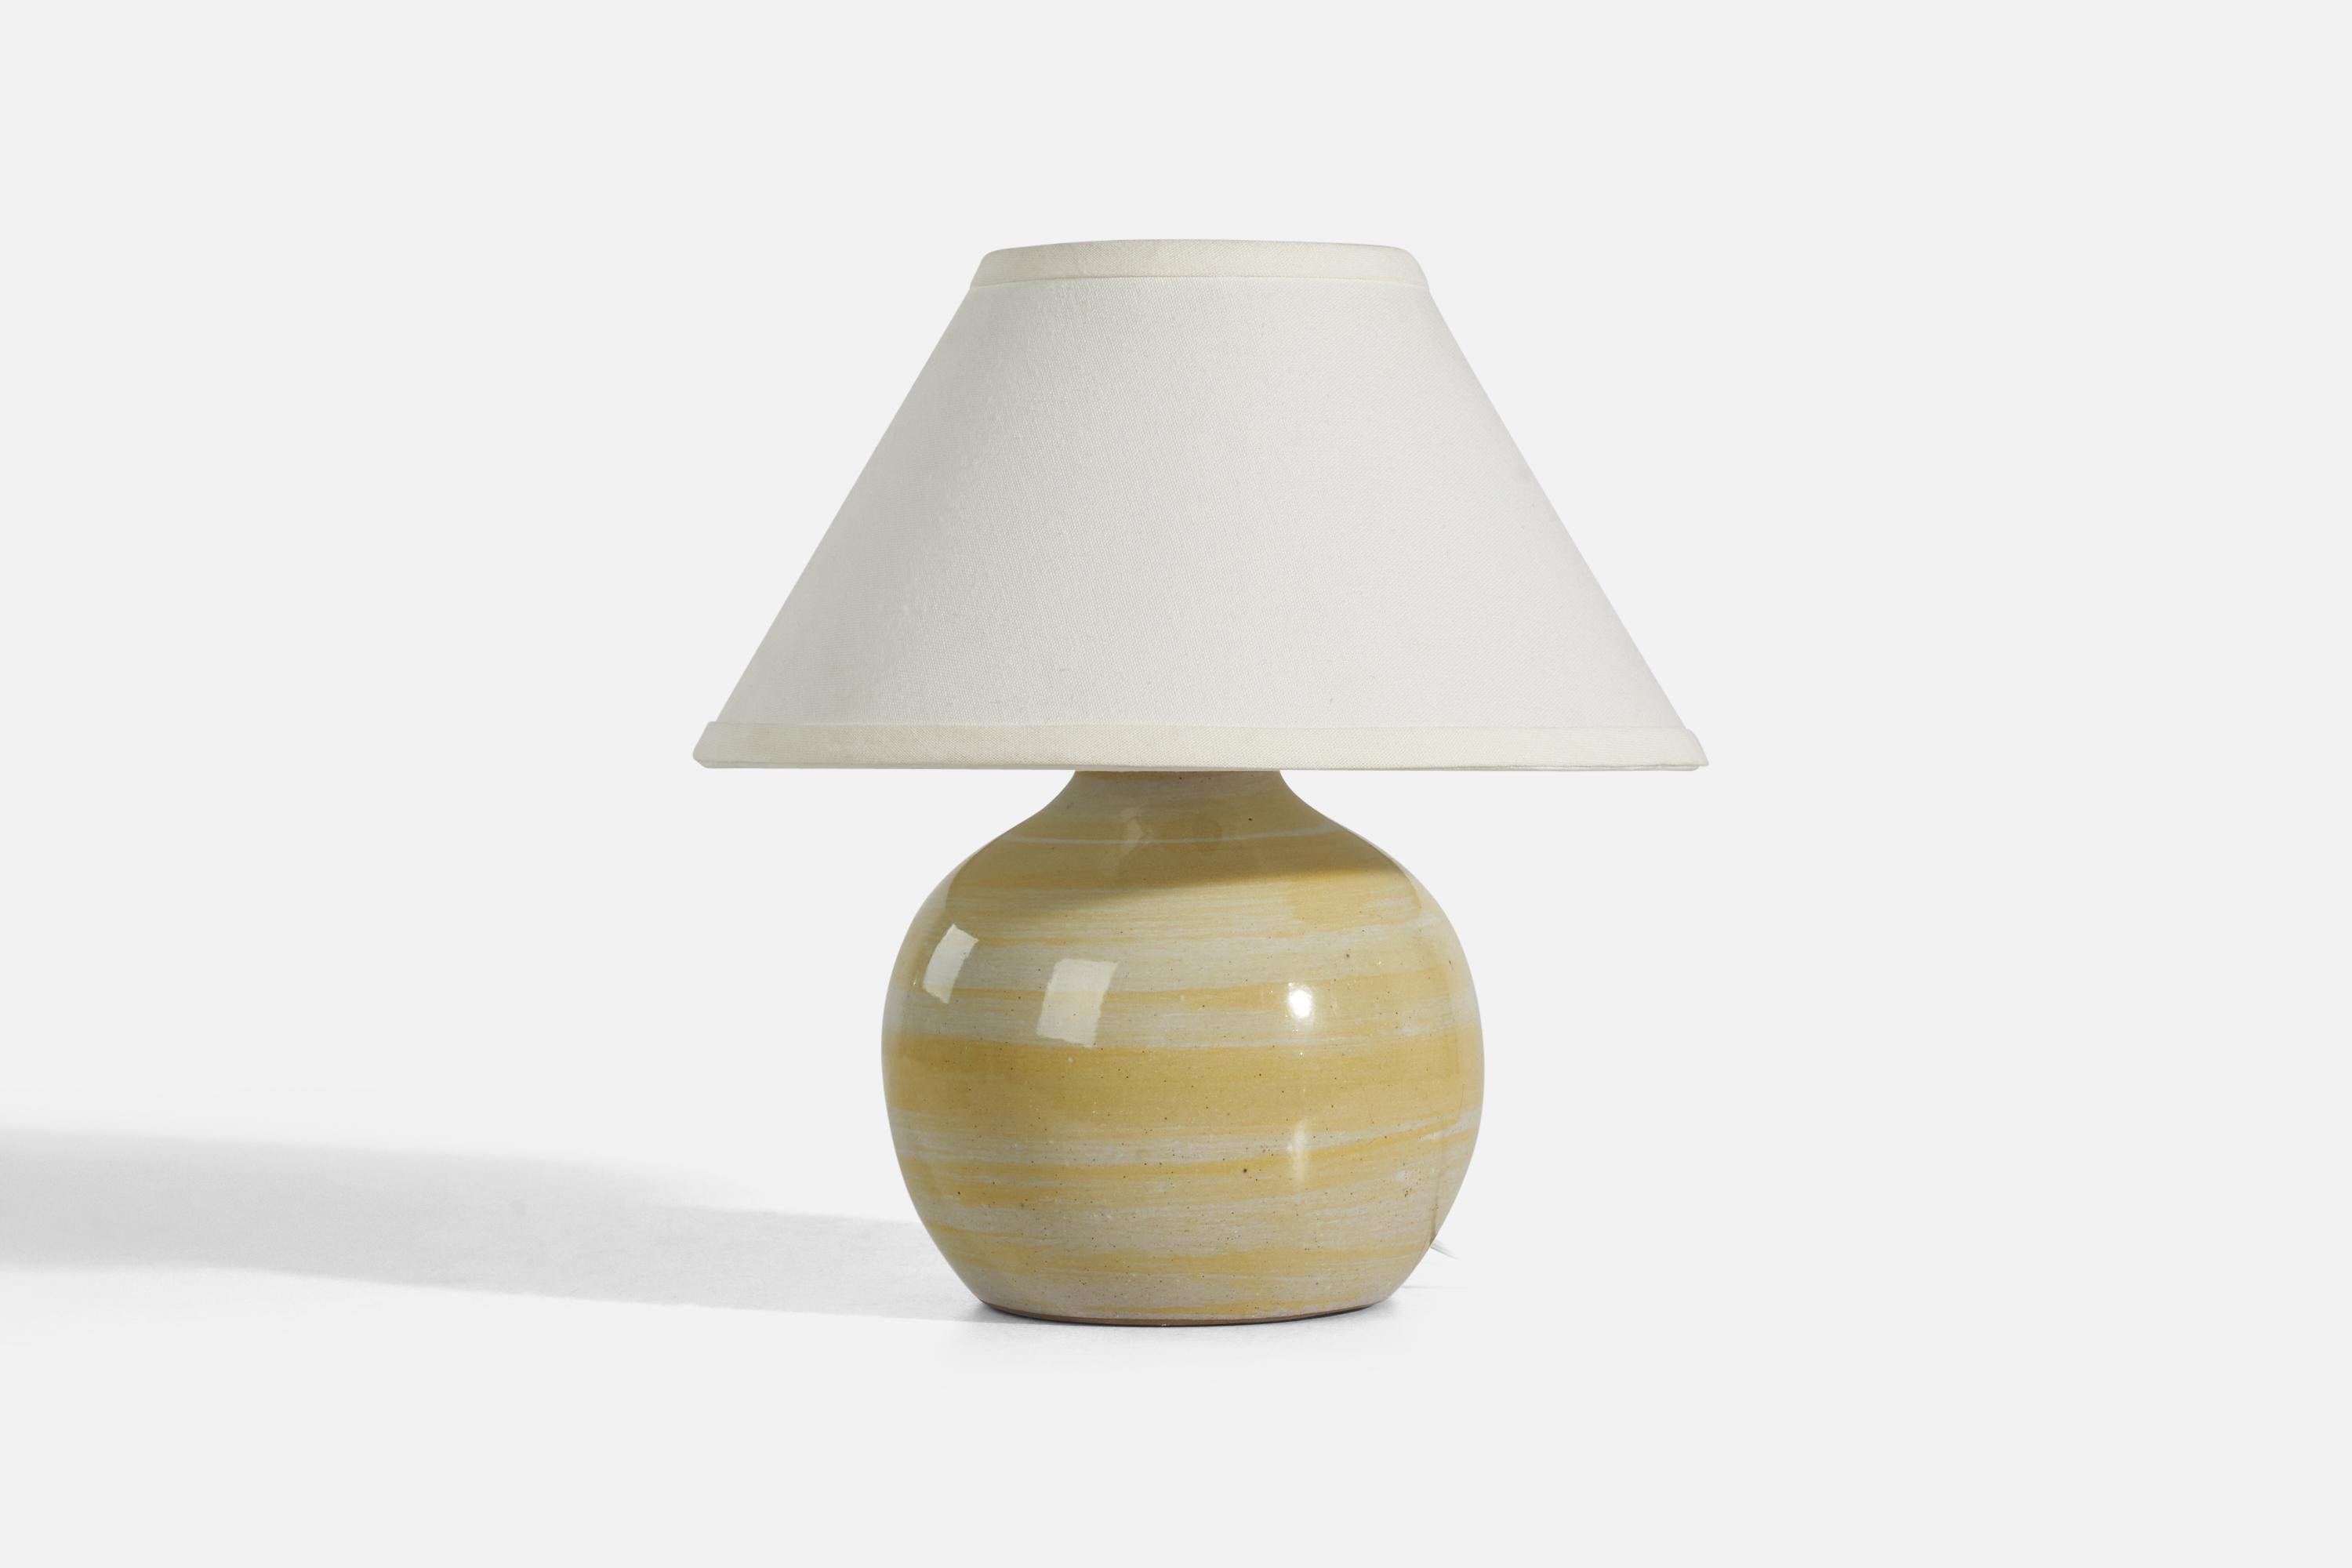 A yellow and white ceramic table lamp designed by Jane & Gordon Martz and produced by Marshall Studios, Indianapolis, 1950s. 

Sold without Lampshade
Dimensions of Lamp (inches) : 9.62 x 7.12 x 7.12 (Height x Width x Depth)
Dimensions of Lampshade